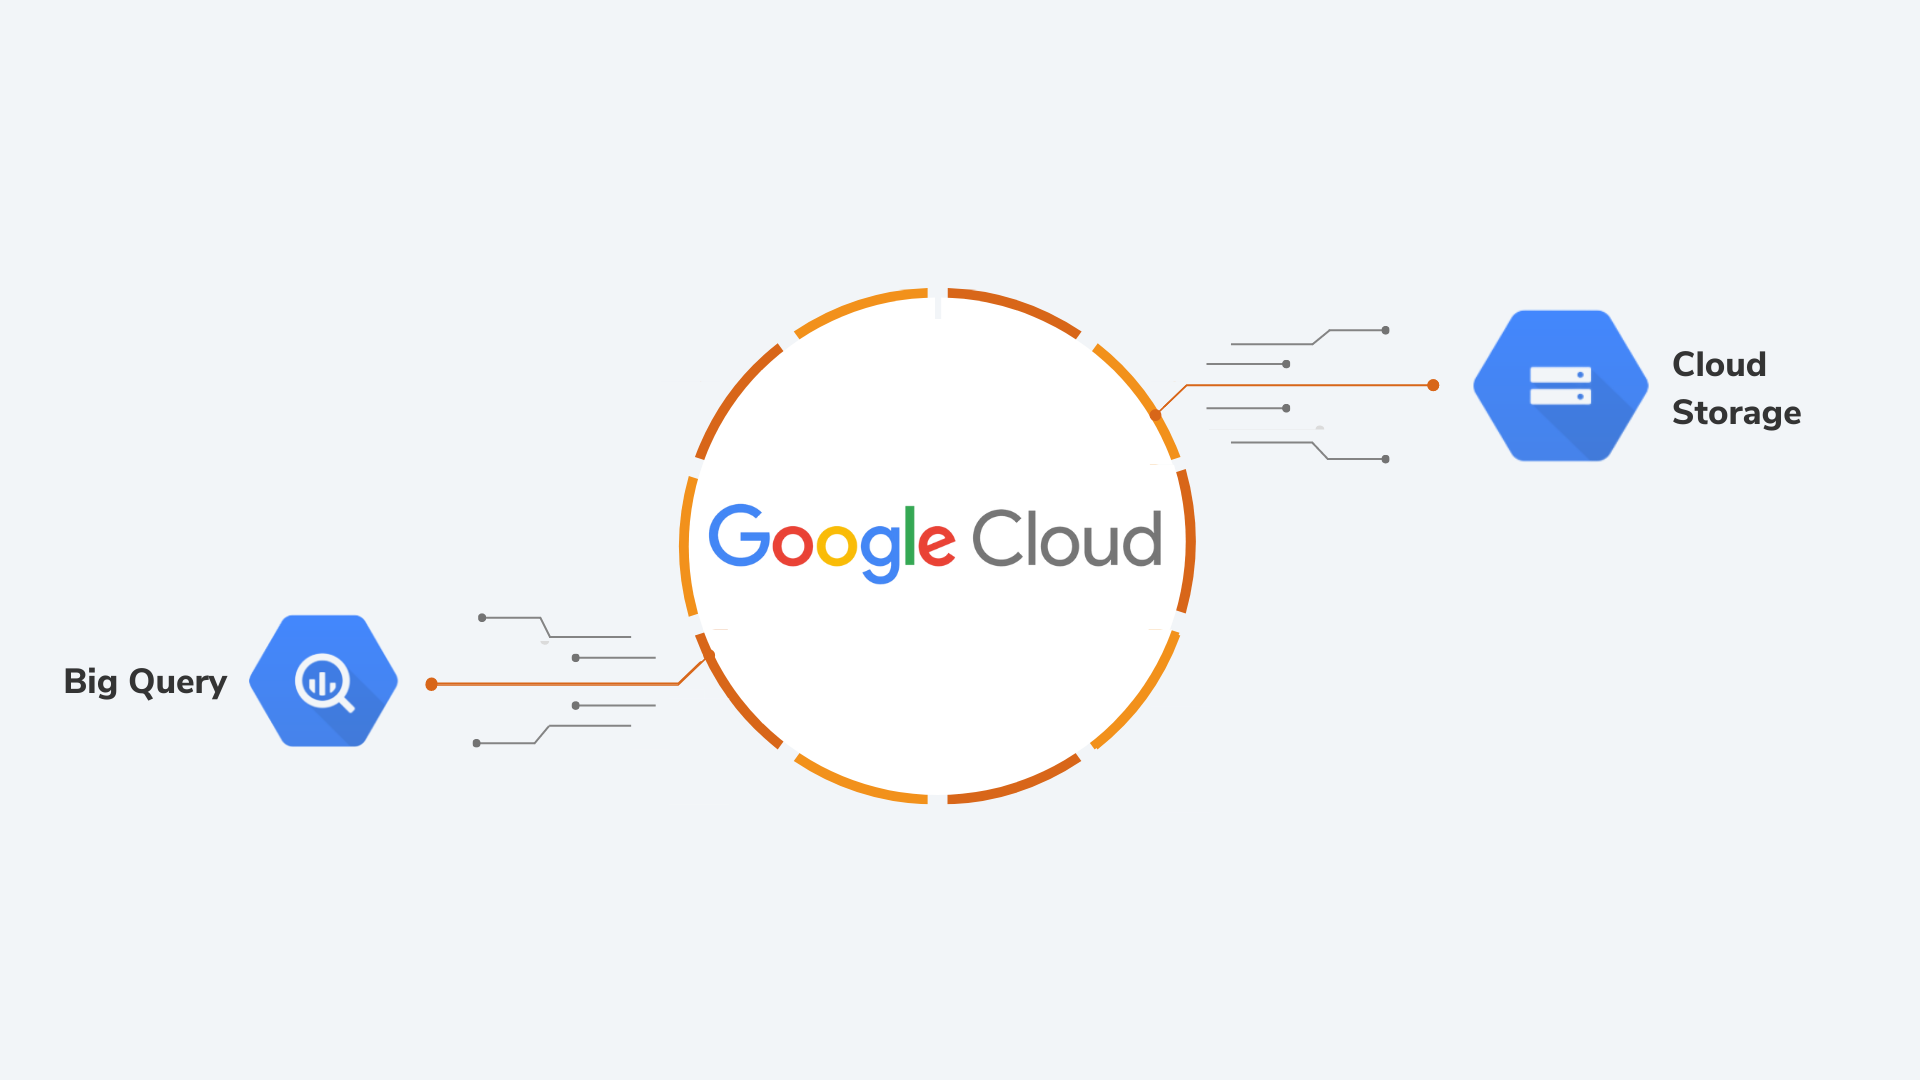 Datametica Solutions Pvt. Ltd | A Financial Services Company Migrates from Teradata and Hadoop to Google Cloud Platform